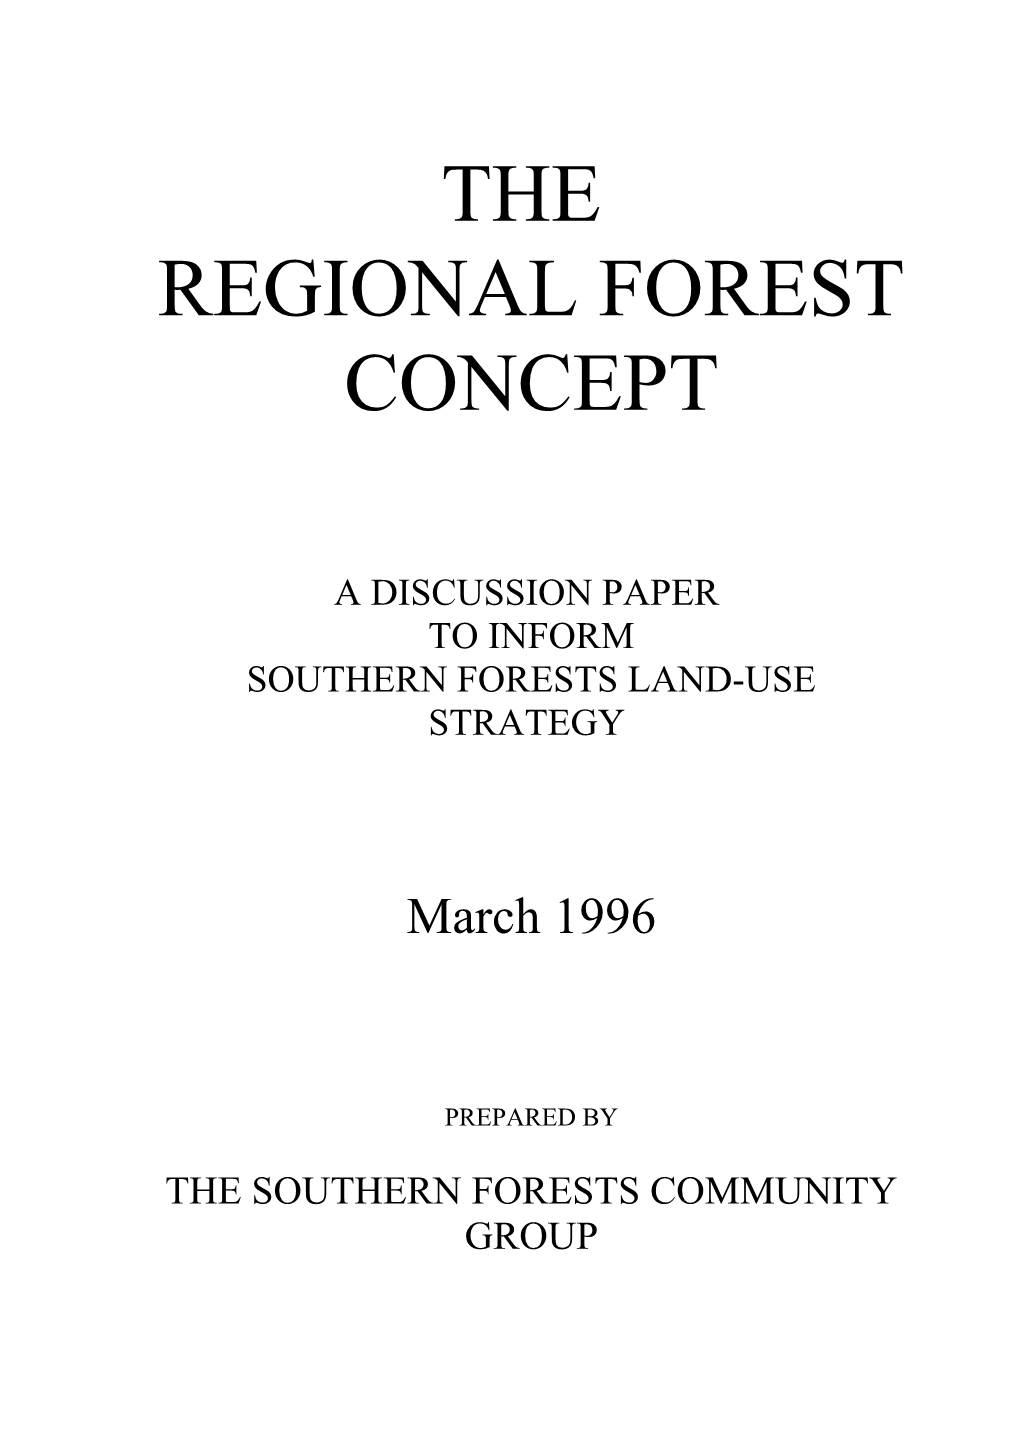 Southern Forests Land-Use Strategy